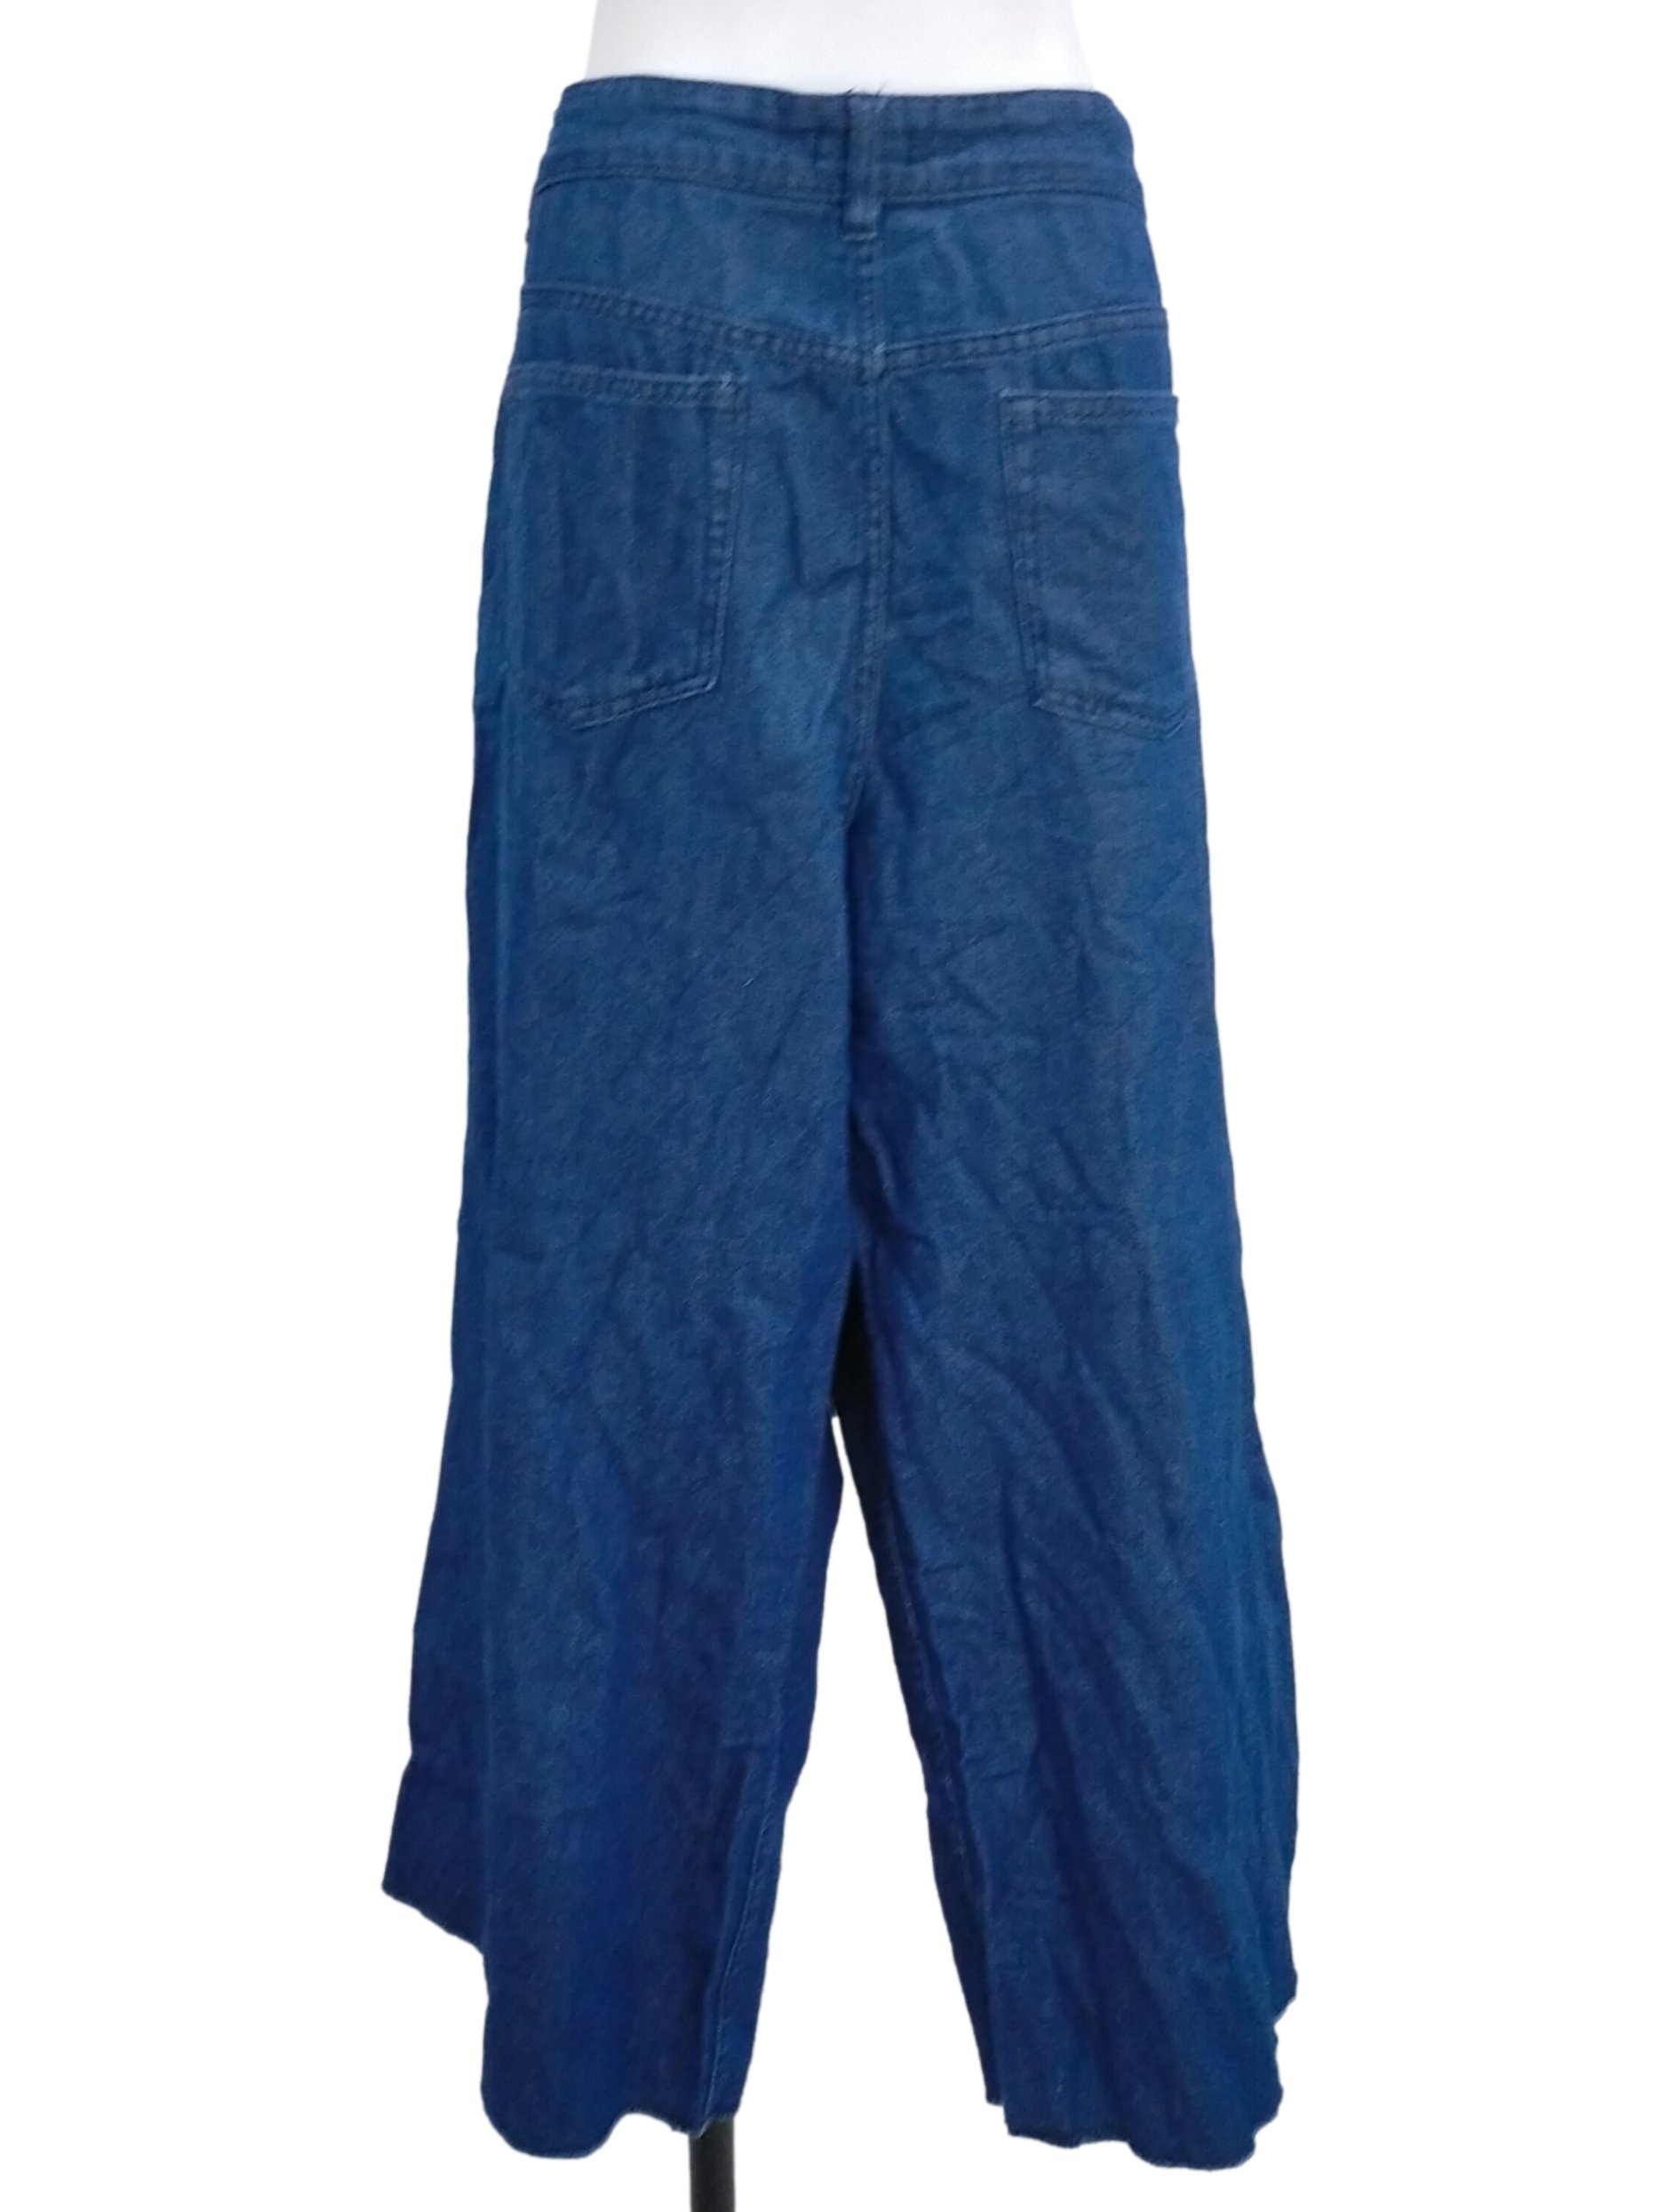 Admiral Blue Formal Jeans